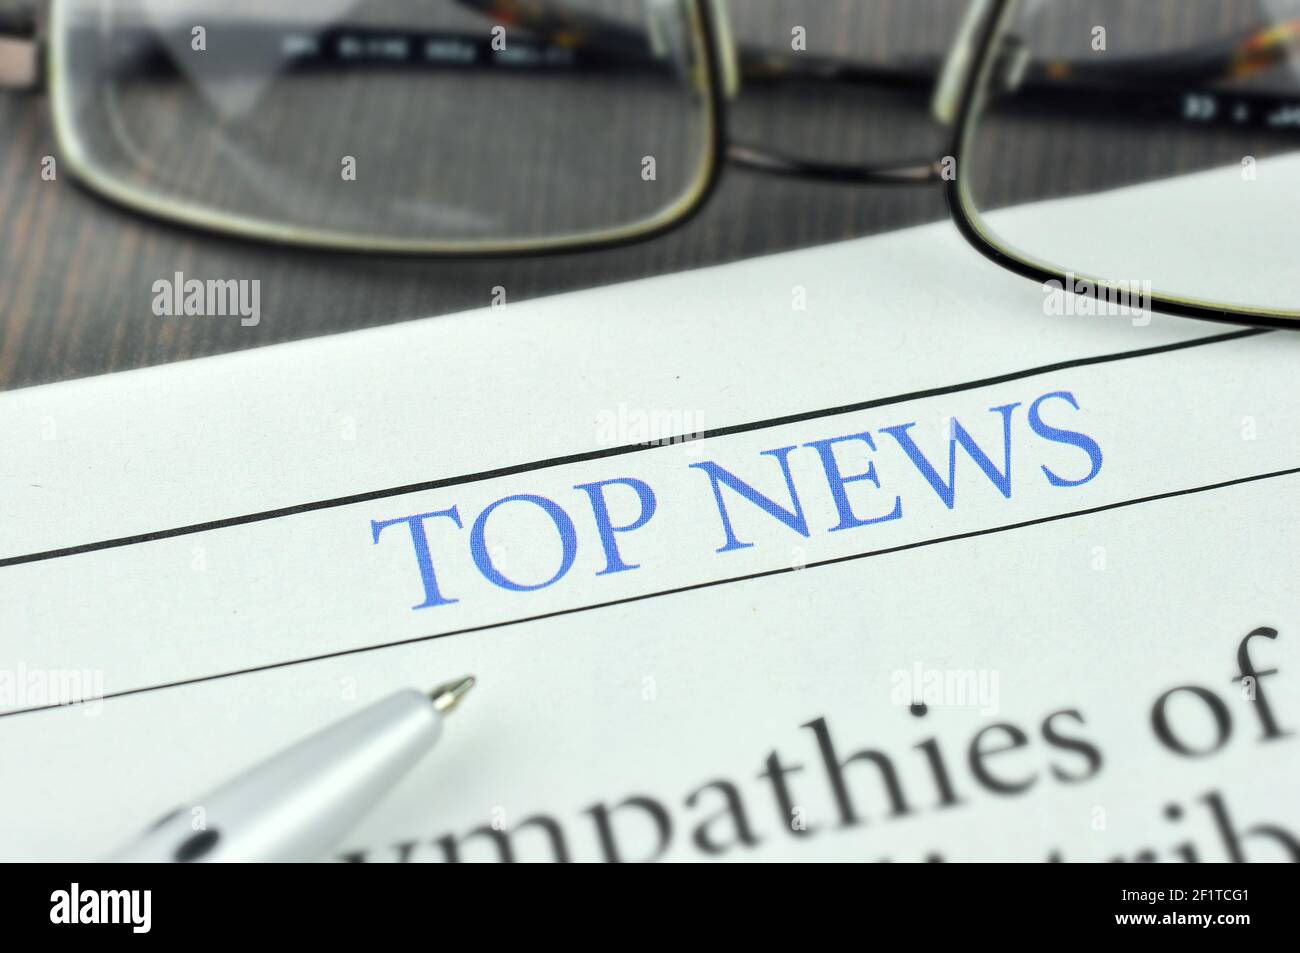 Pen, Eyeglasses and Newspaper. Heading a Top News in the Newspaper. Concept Top News. Macro photo. Stock Photo